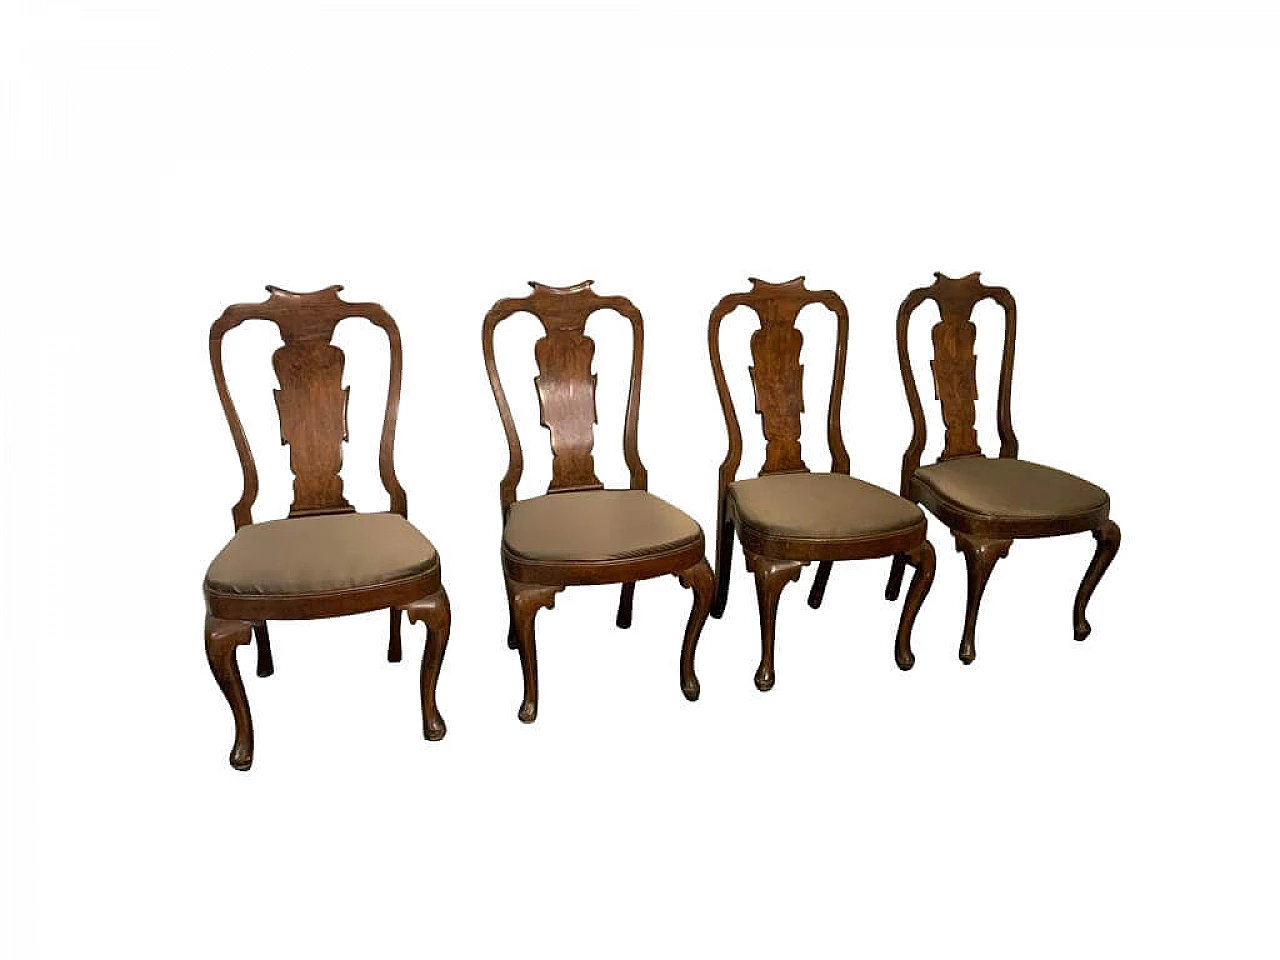 4 Antique Chippendale style chairs, 1800s 1202733